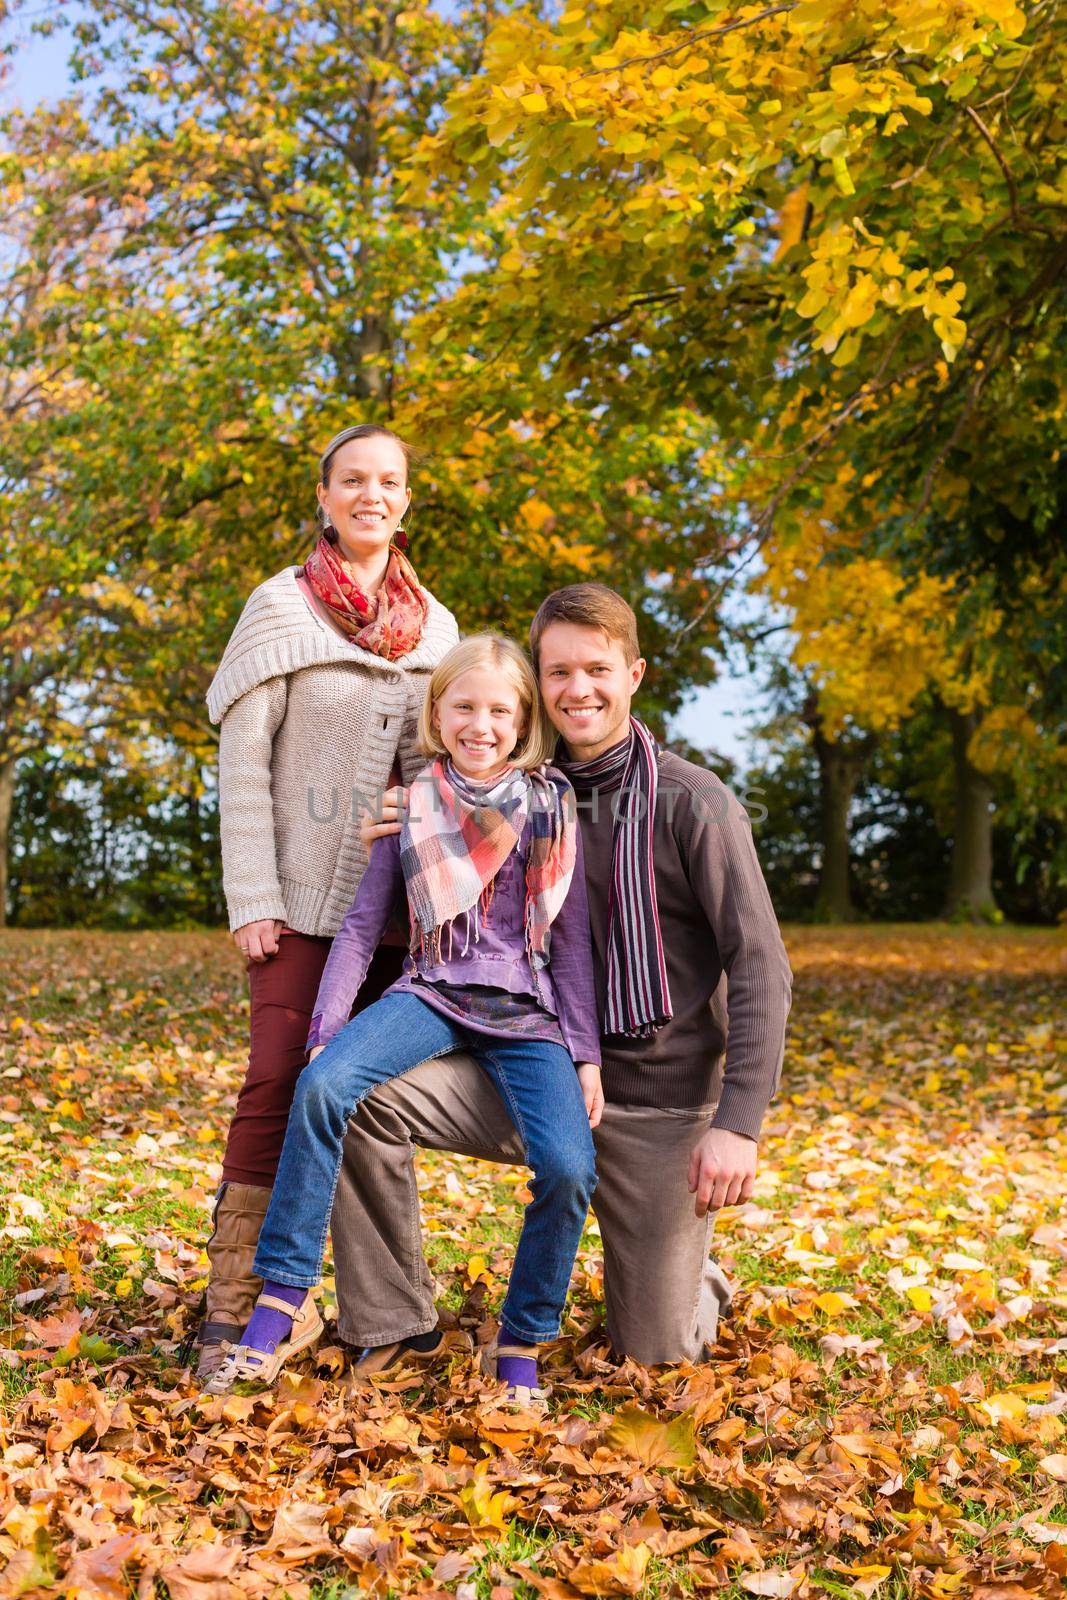 Family in front of colorful trees in autumn or fall by Kzenon